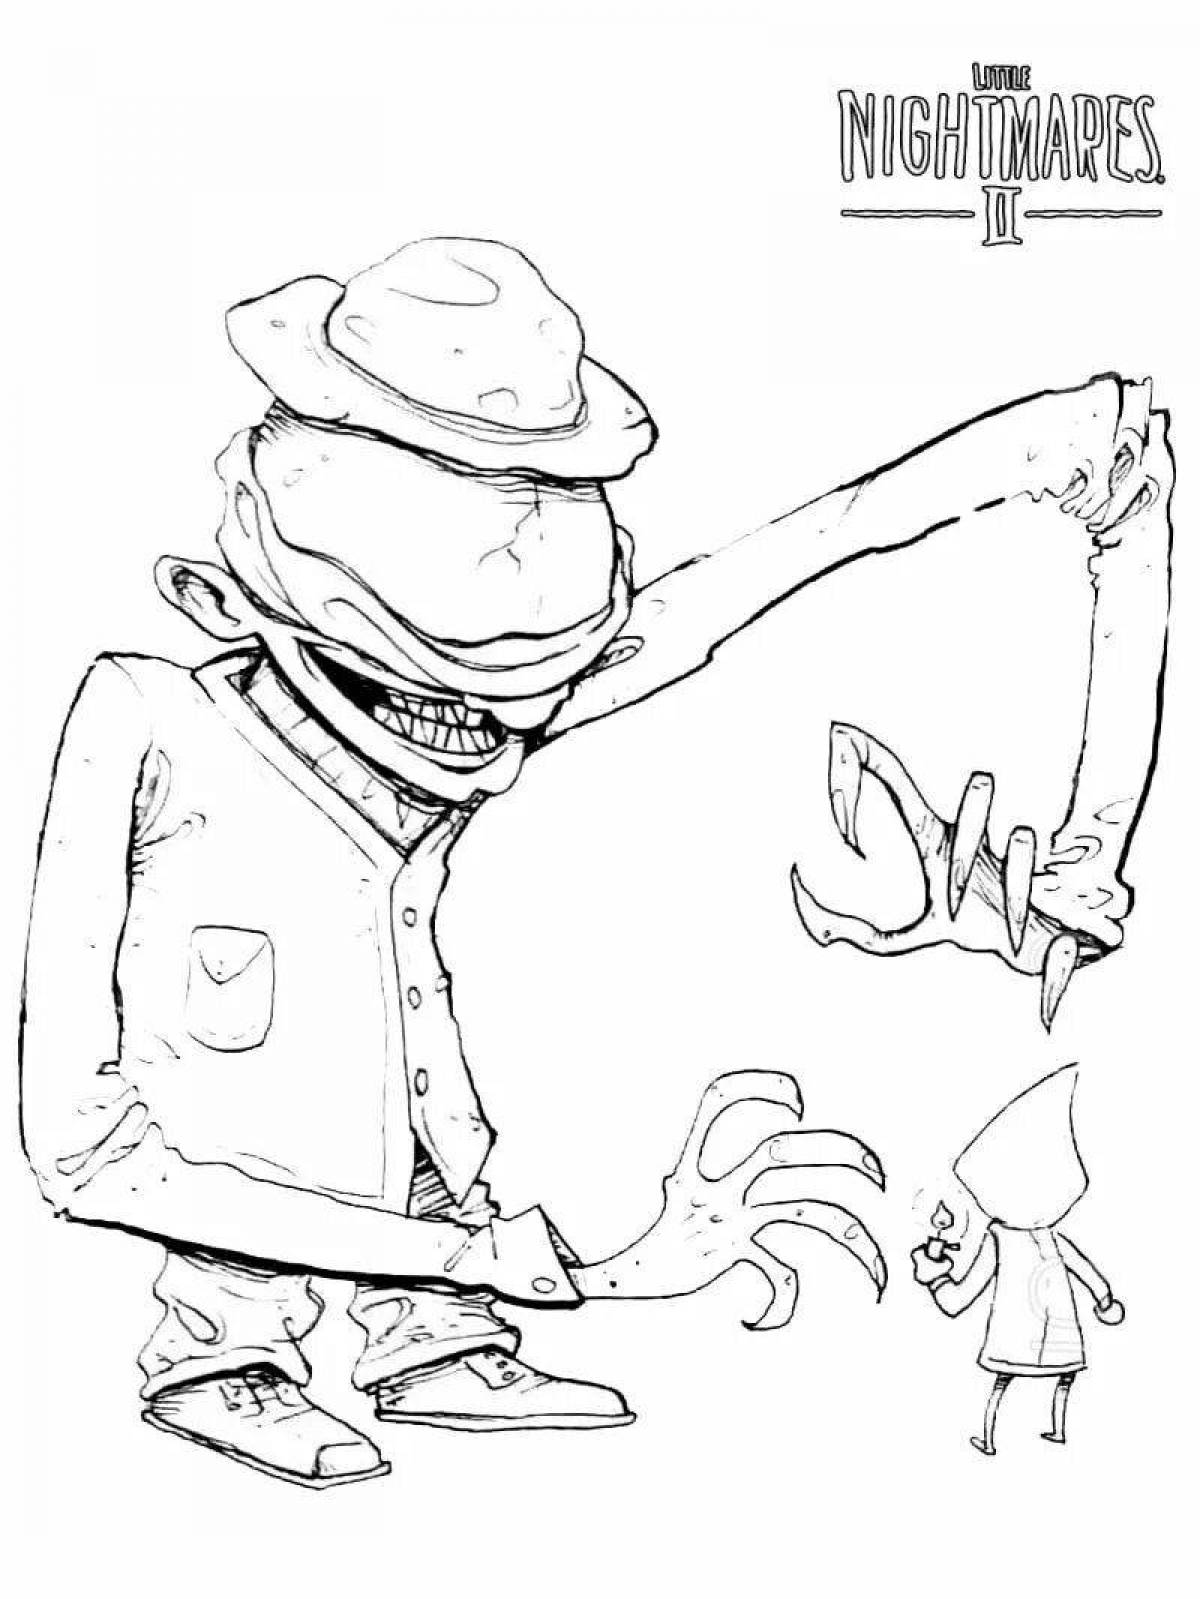 Surreal little nightmares coloring book